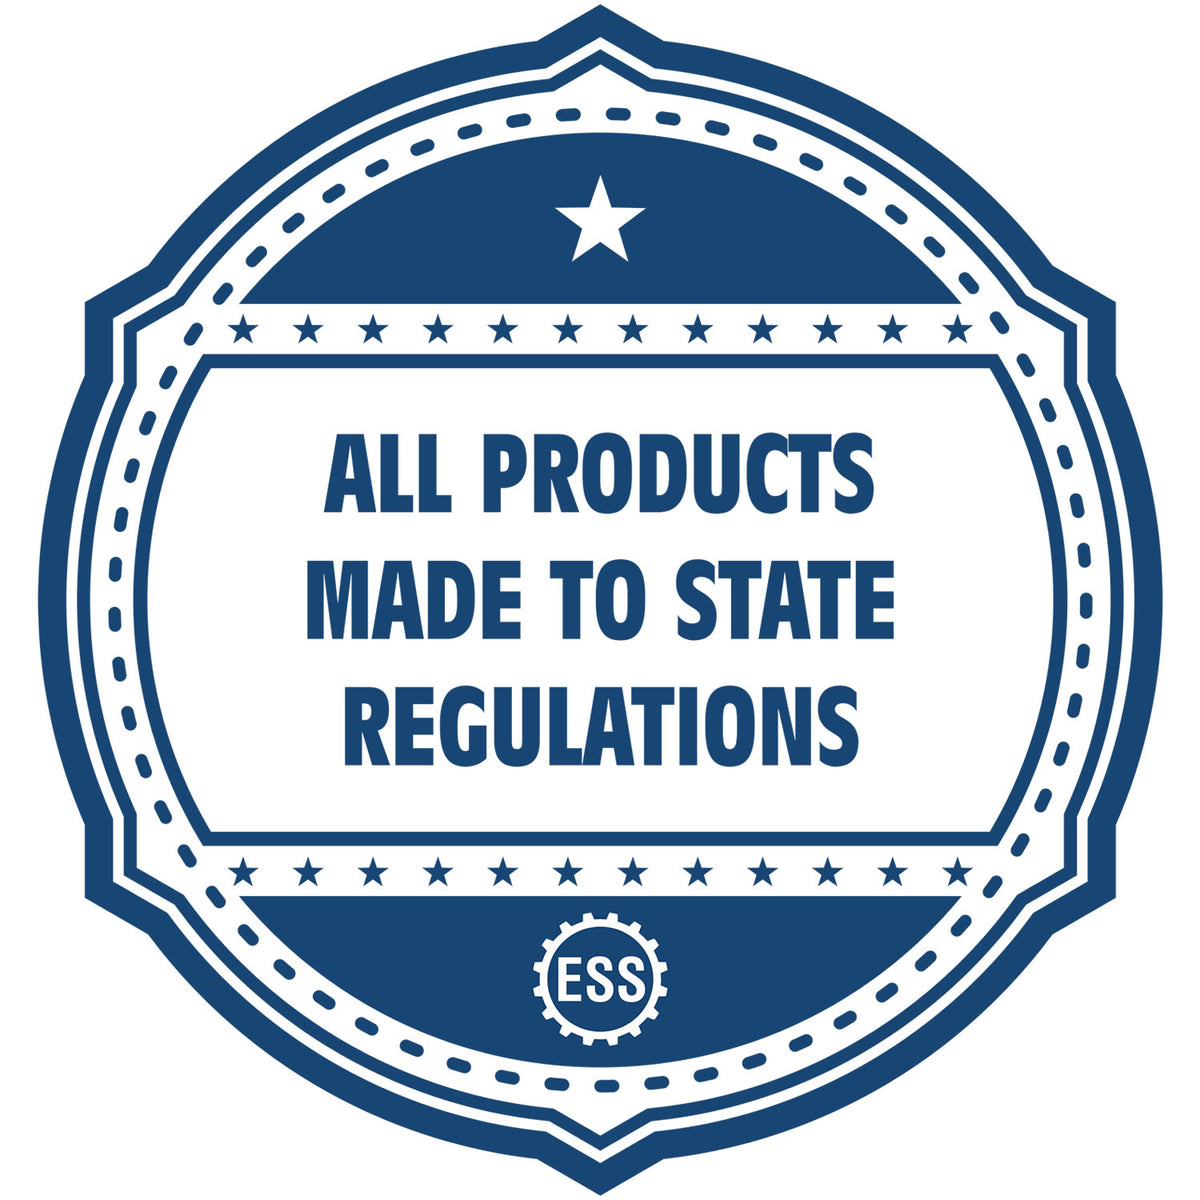 An icon or badge element for the Wyoming Landscape Architectural Seal Stamp showing that this product is made in compliance with state regulations.